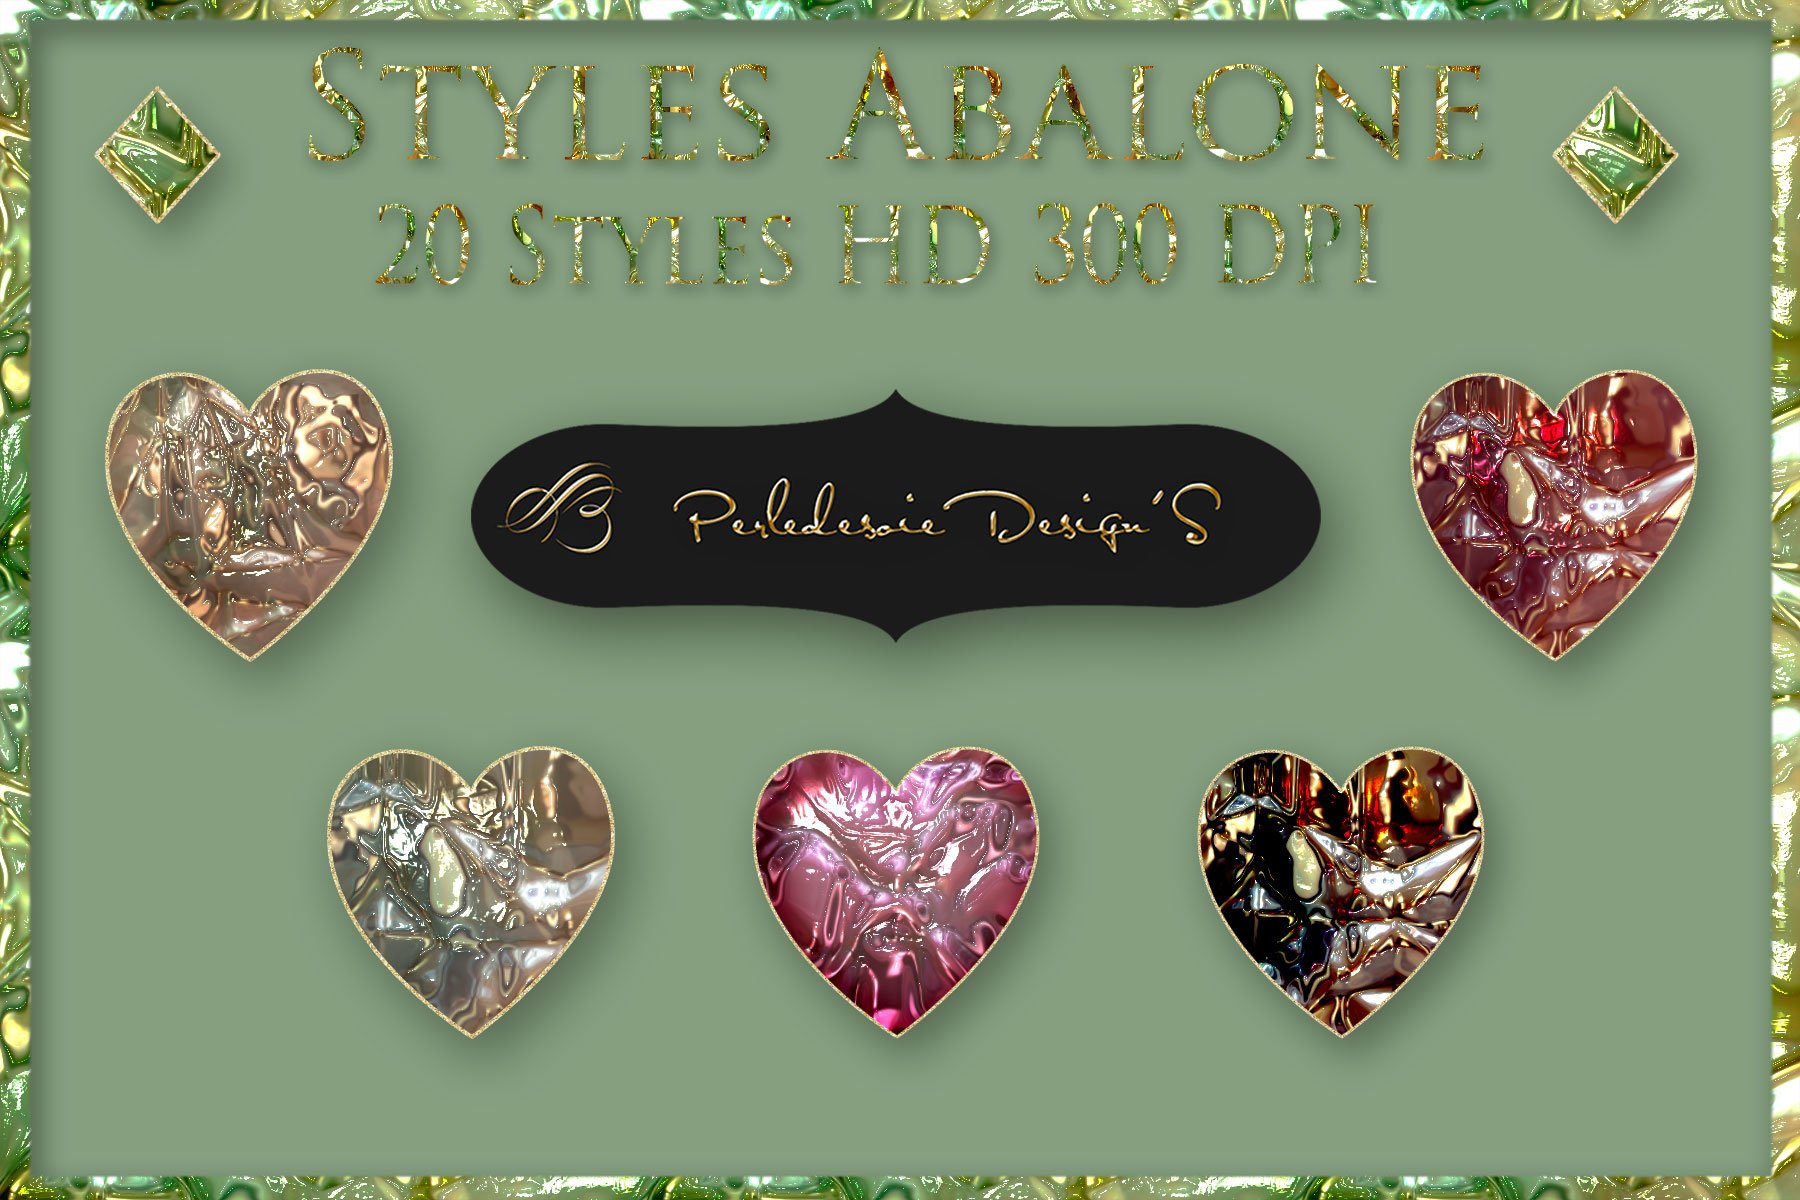 Styles Abalonespreview image.